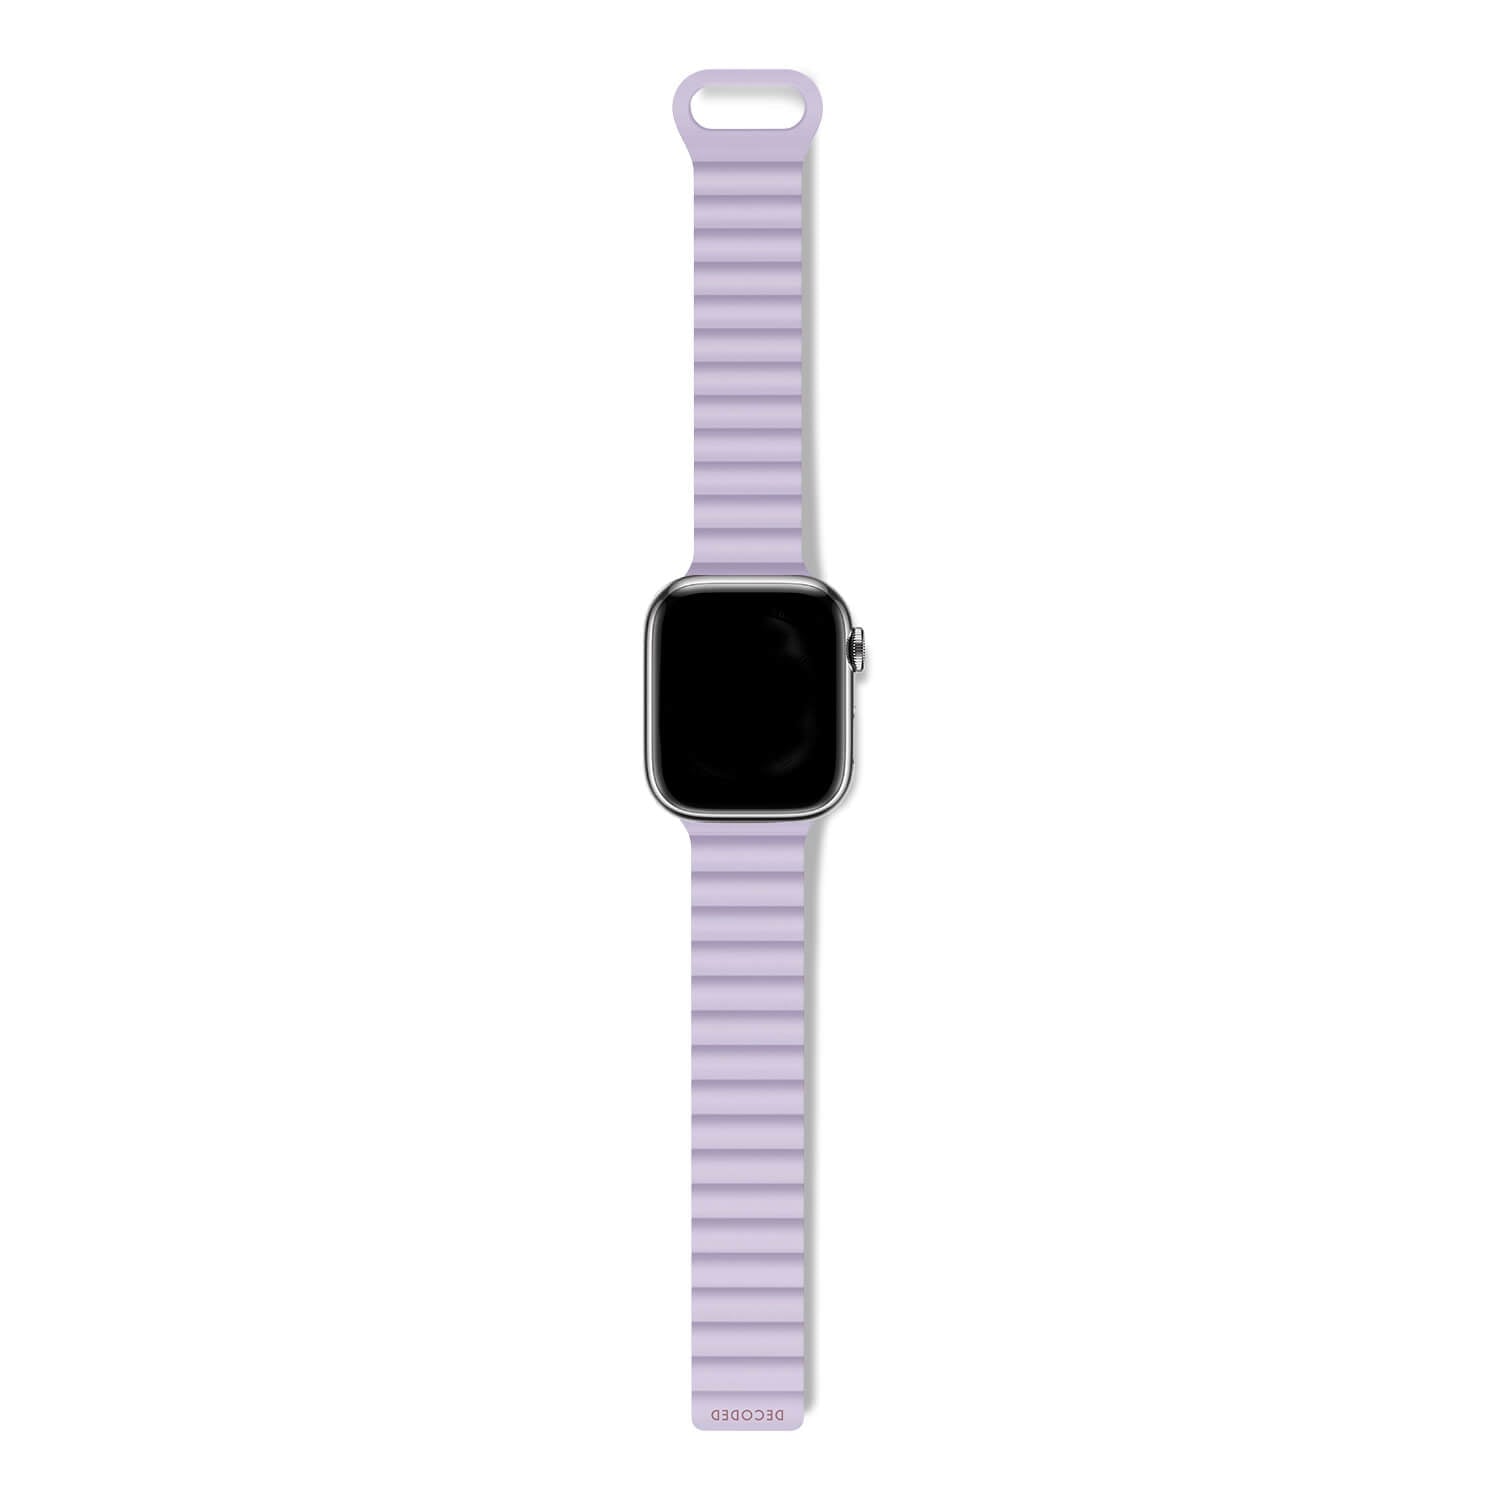 Silicone Traction Loop Strap Apple Watch 38mm Lavender